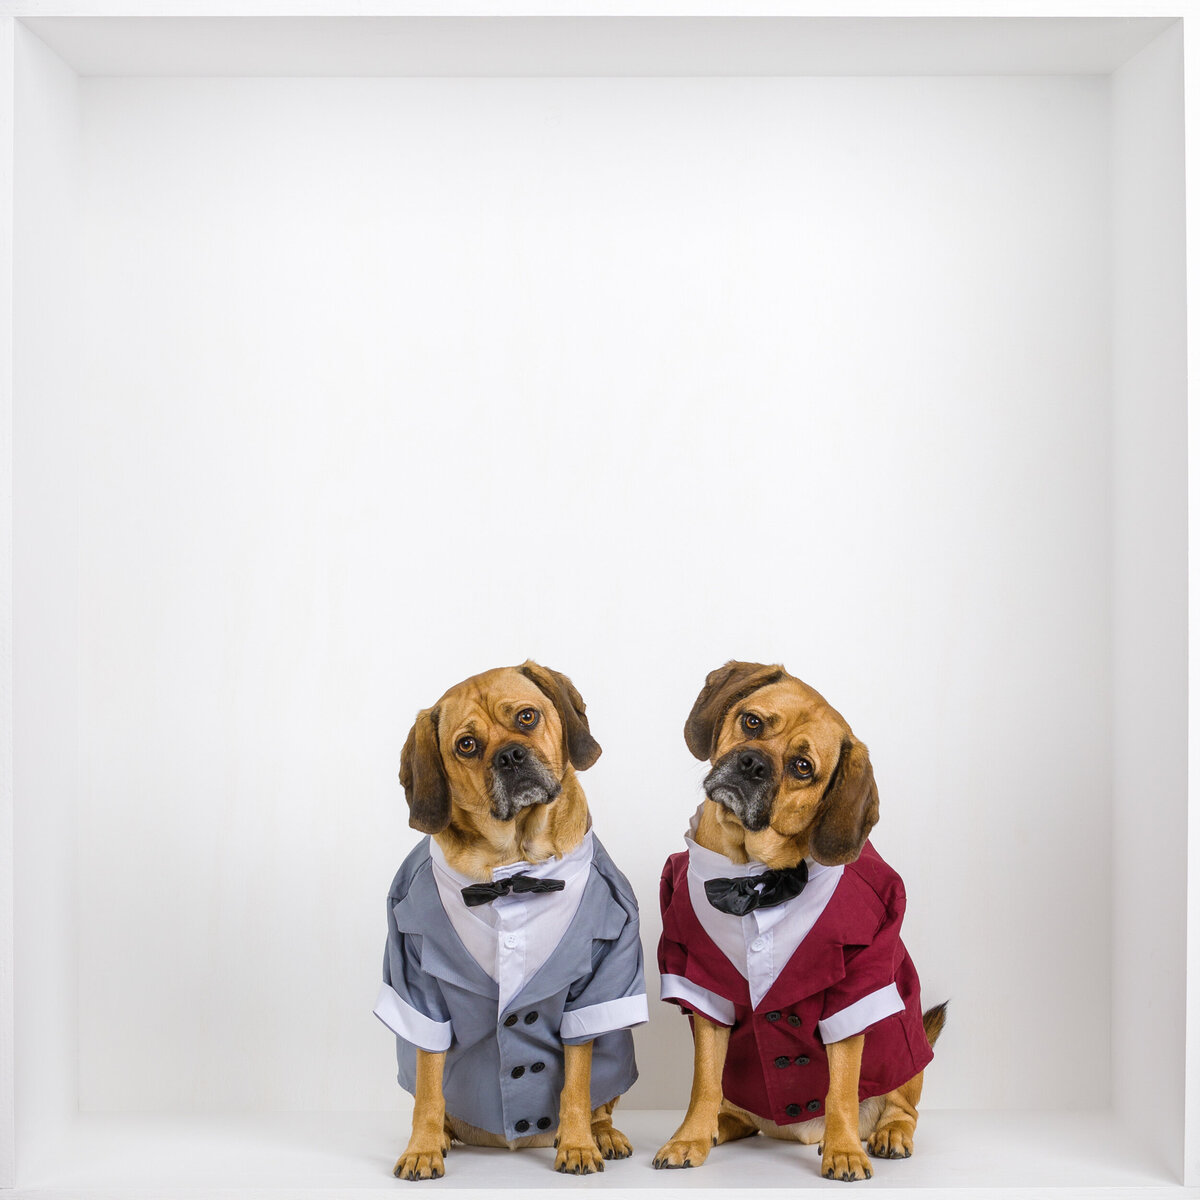 Two dogs wearing tuxedos in a whilte box